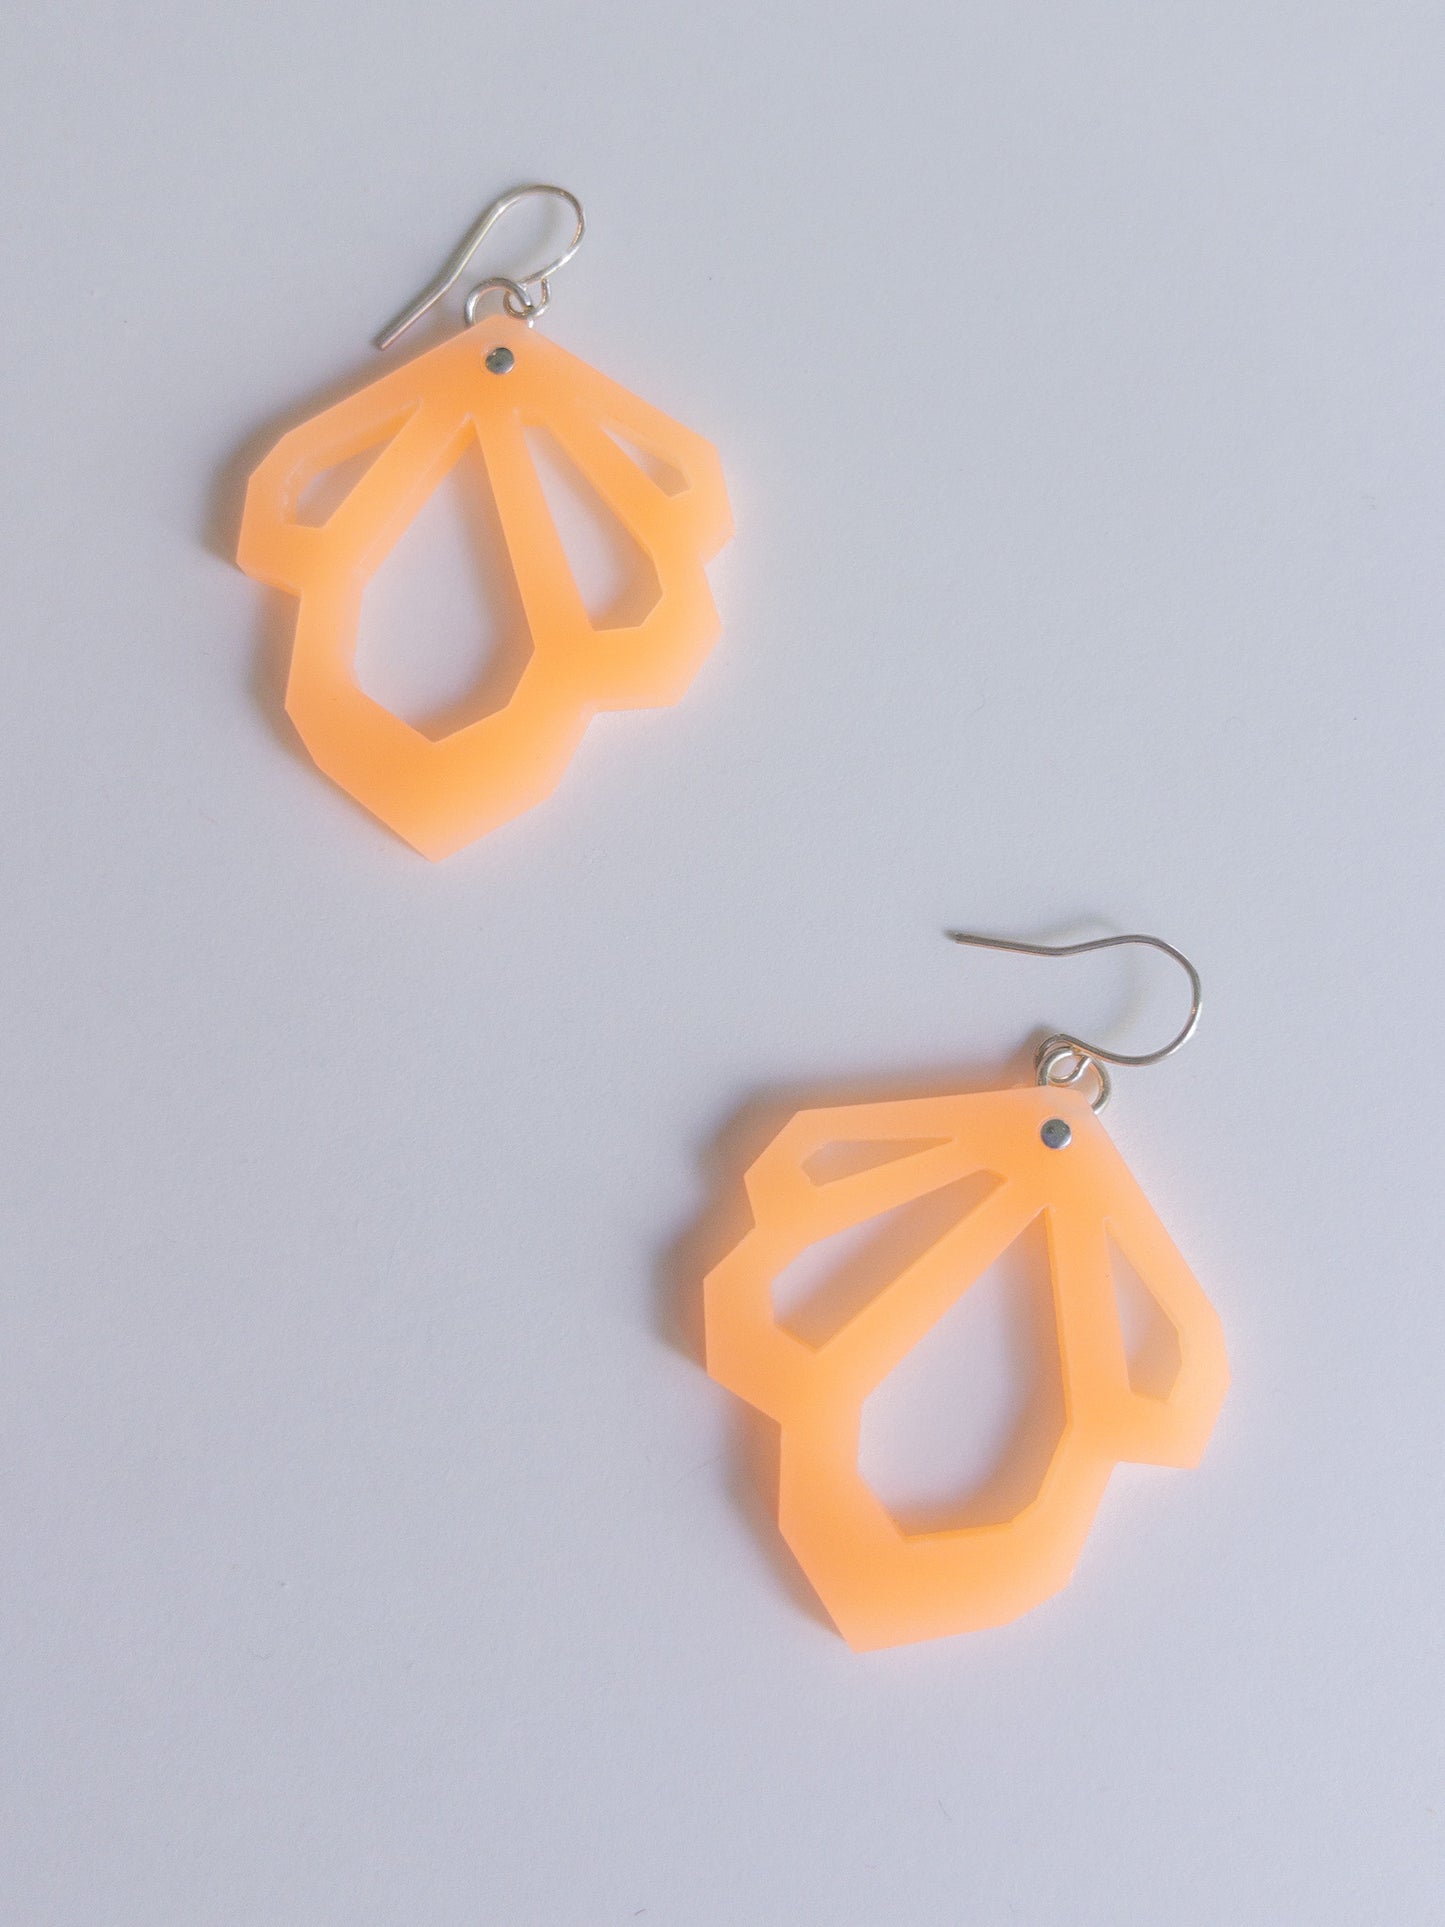 WOLL Faceted Acrylic Translucent Sherbet Orange Earrings - NEW